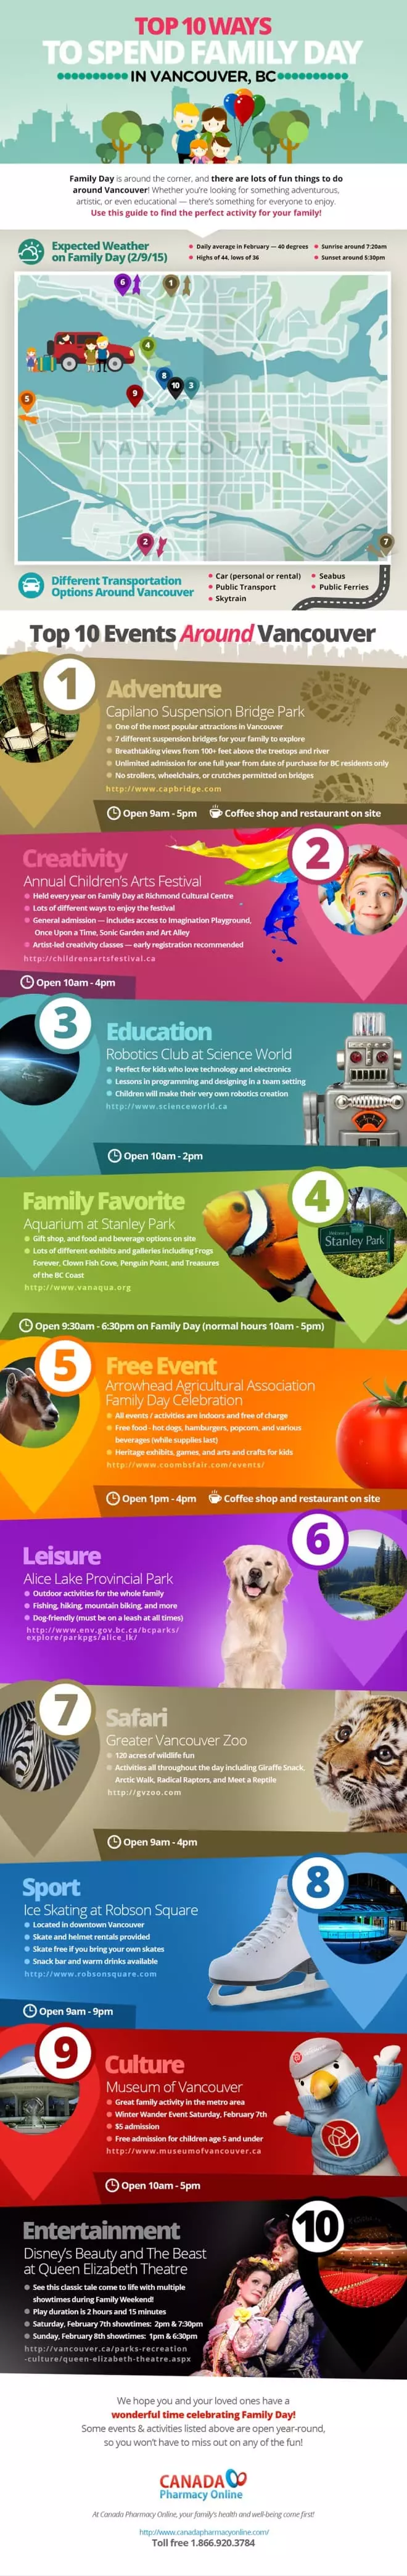 Infographic: Top 10 Ways to Spend Family Day in Vancouver BC